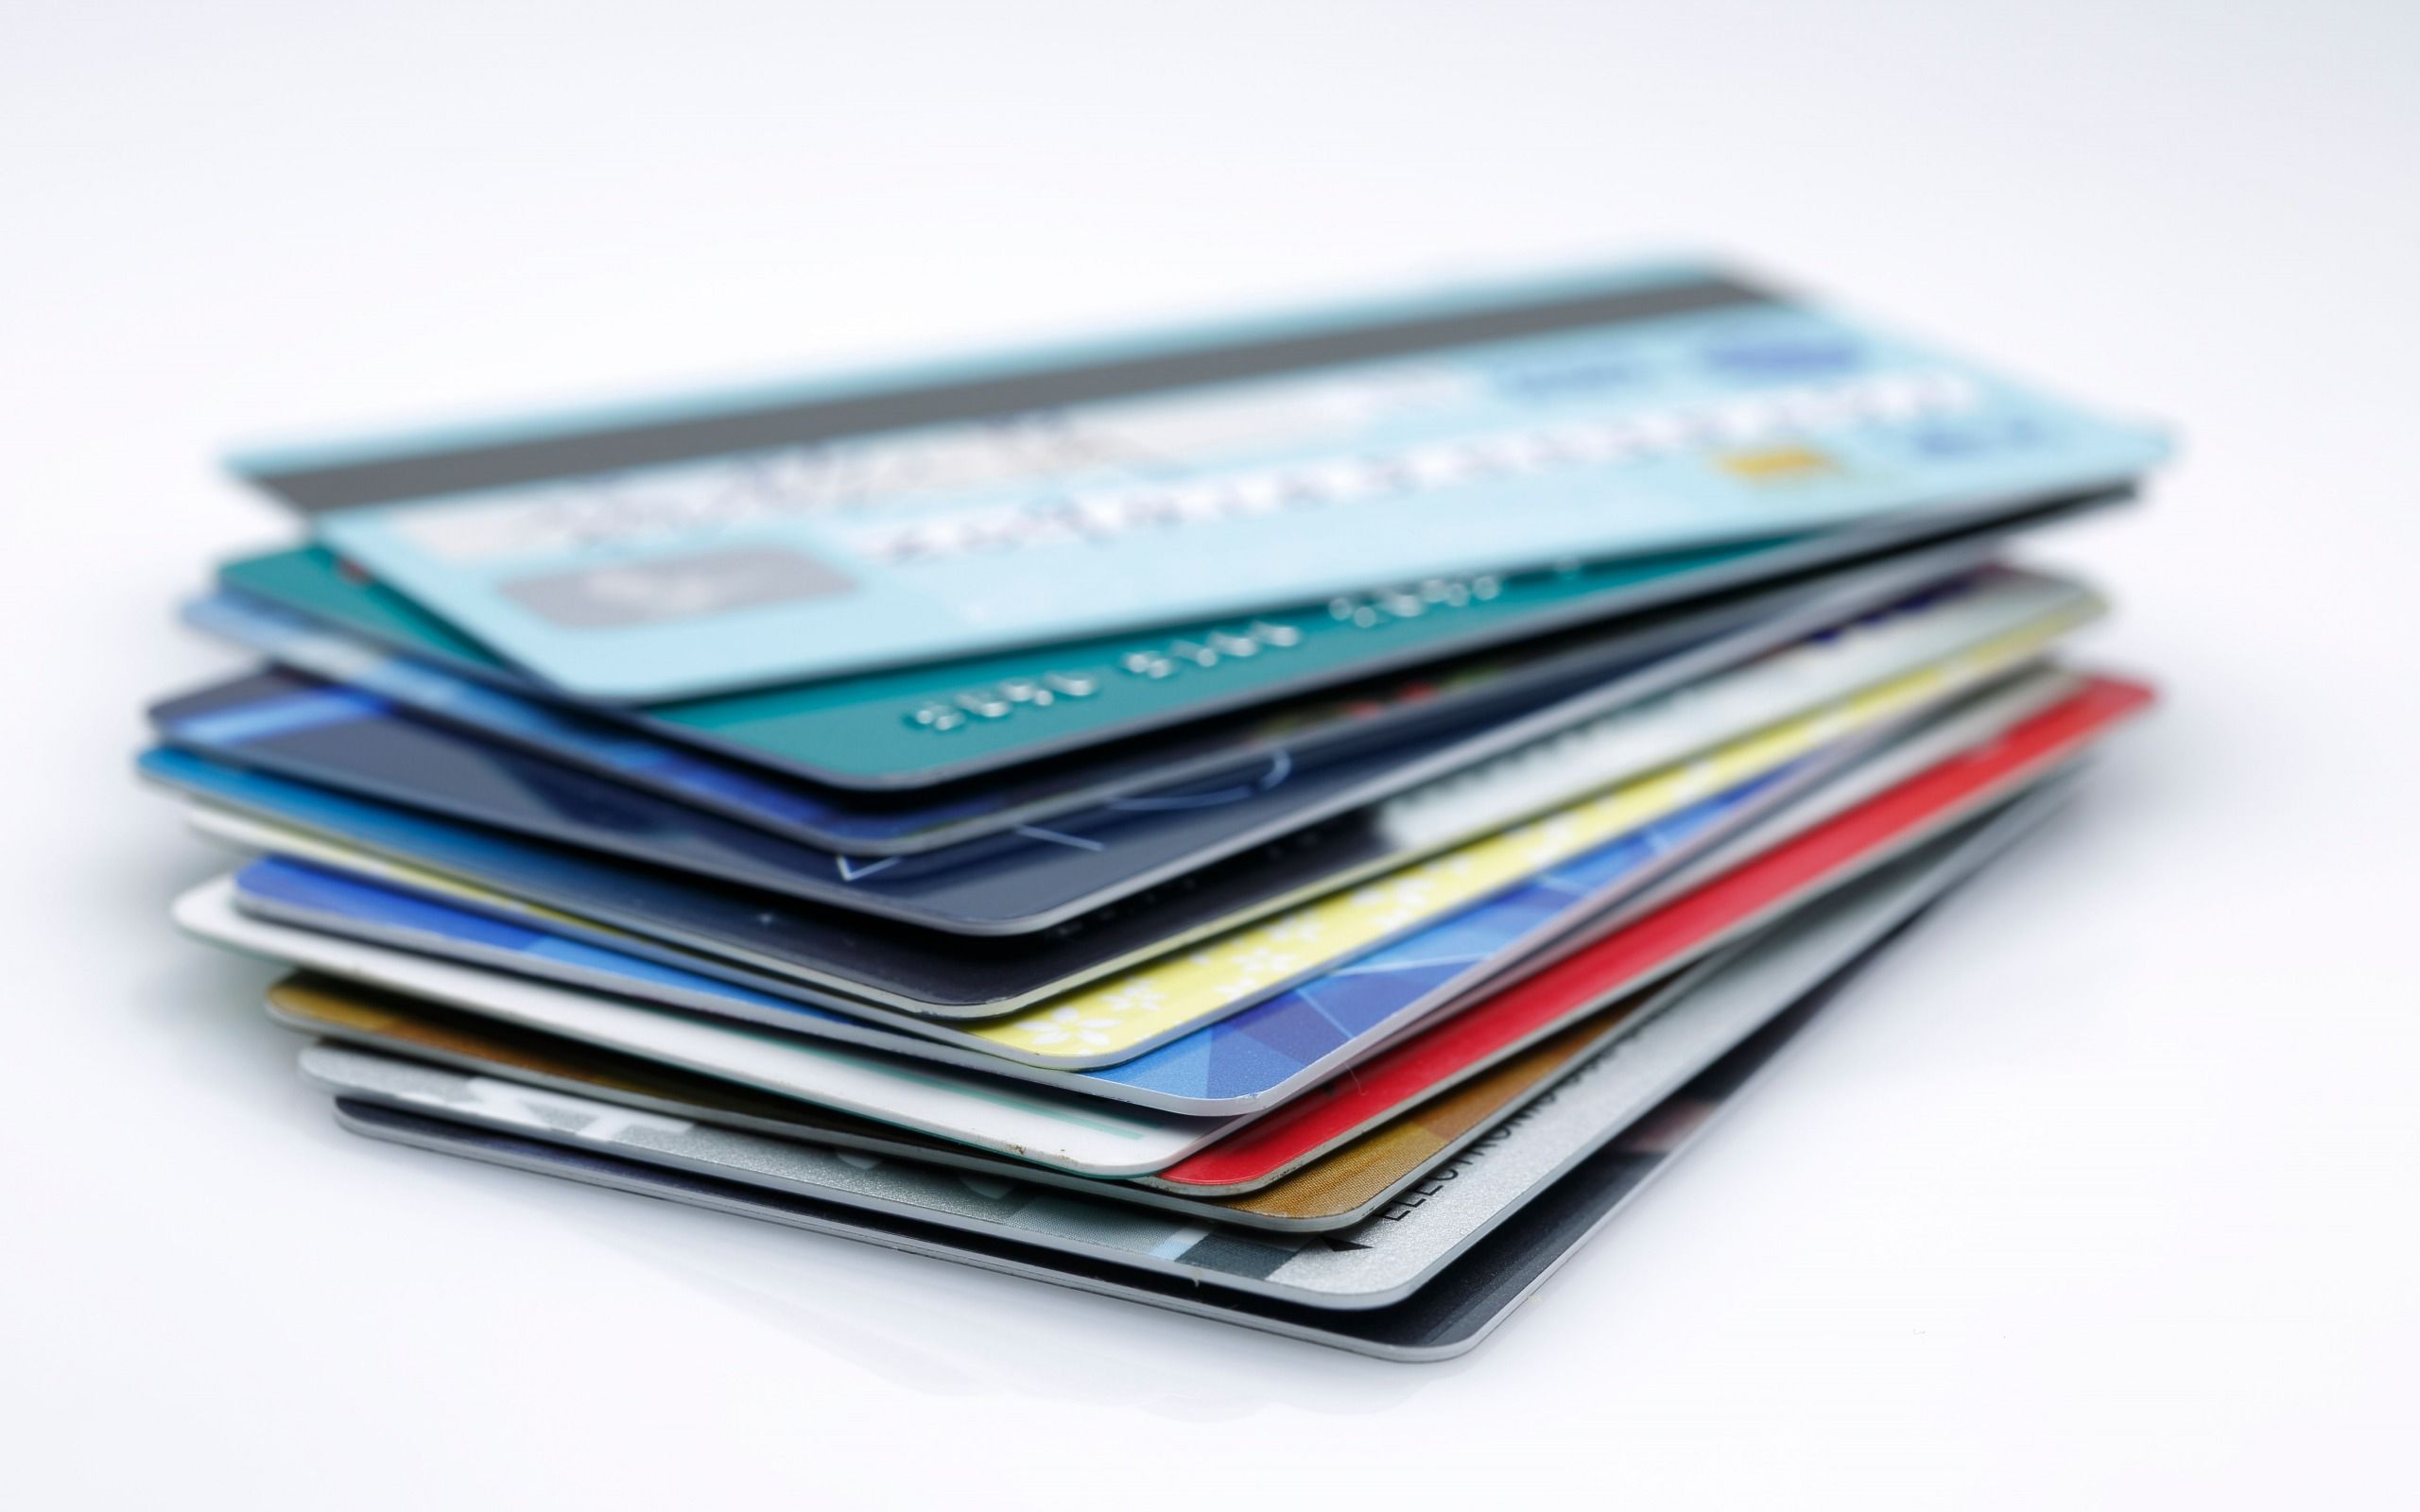 Download wallpaper credit cards, payment concepts, bank cards